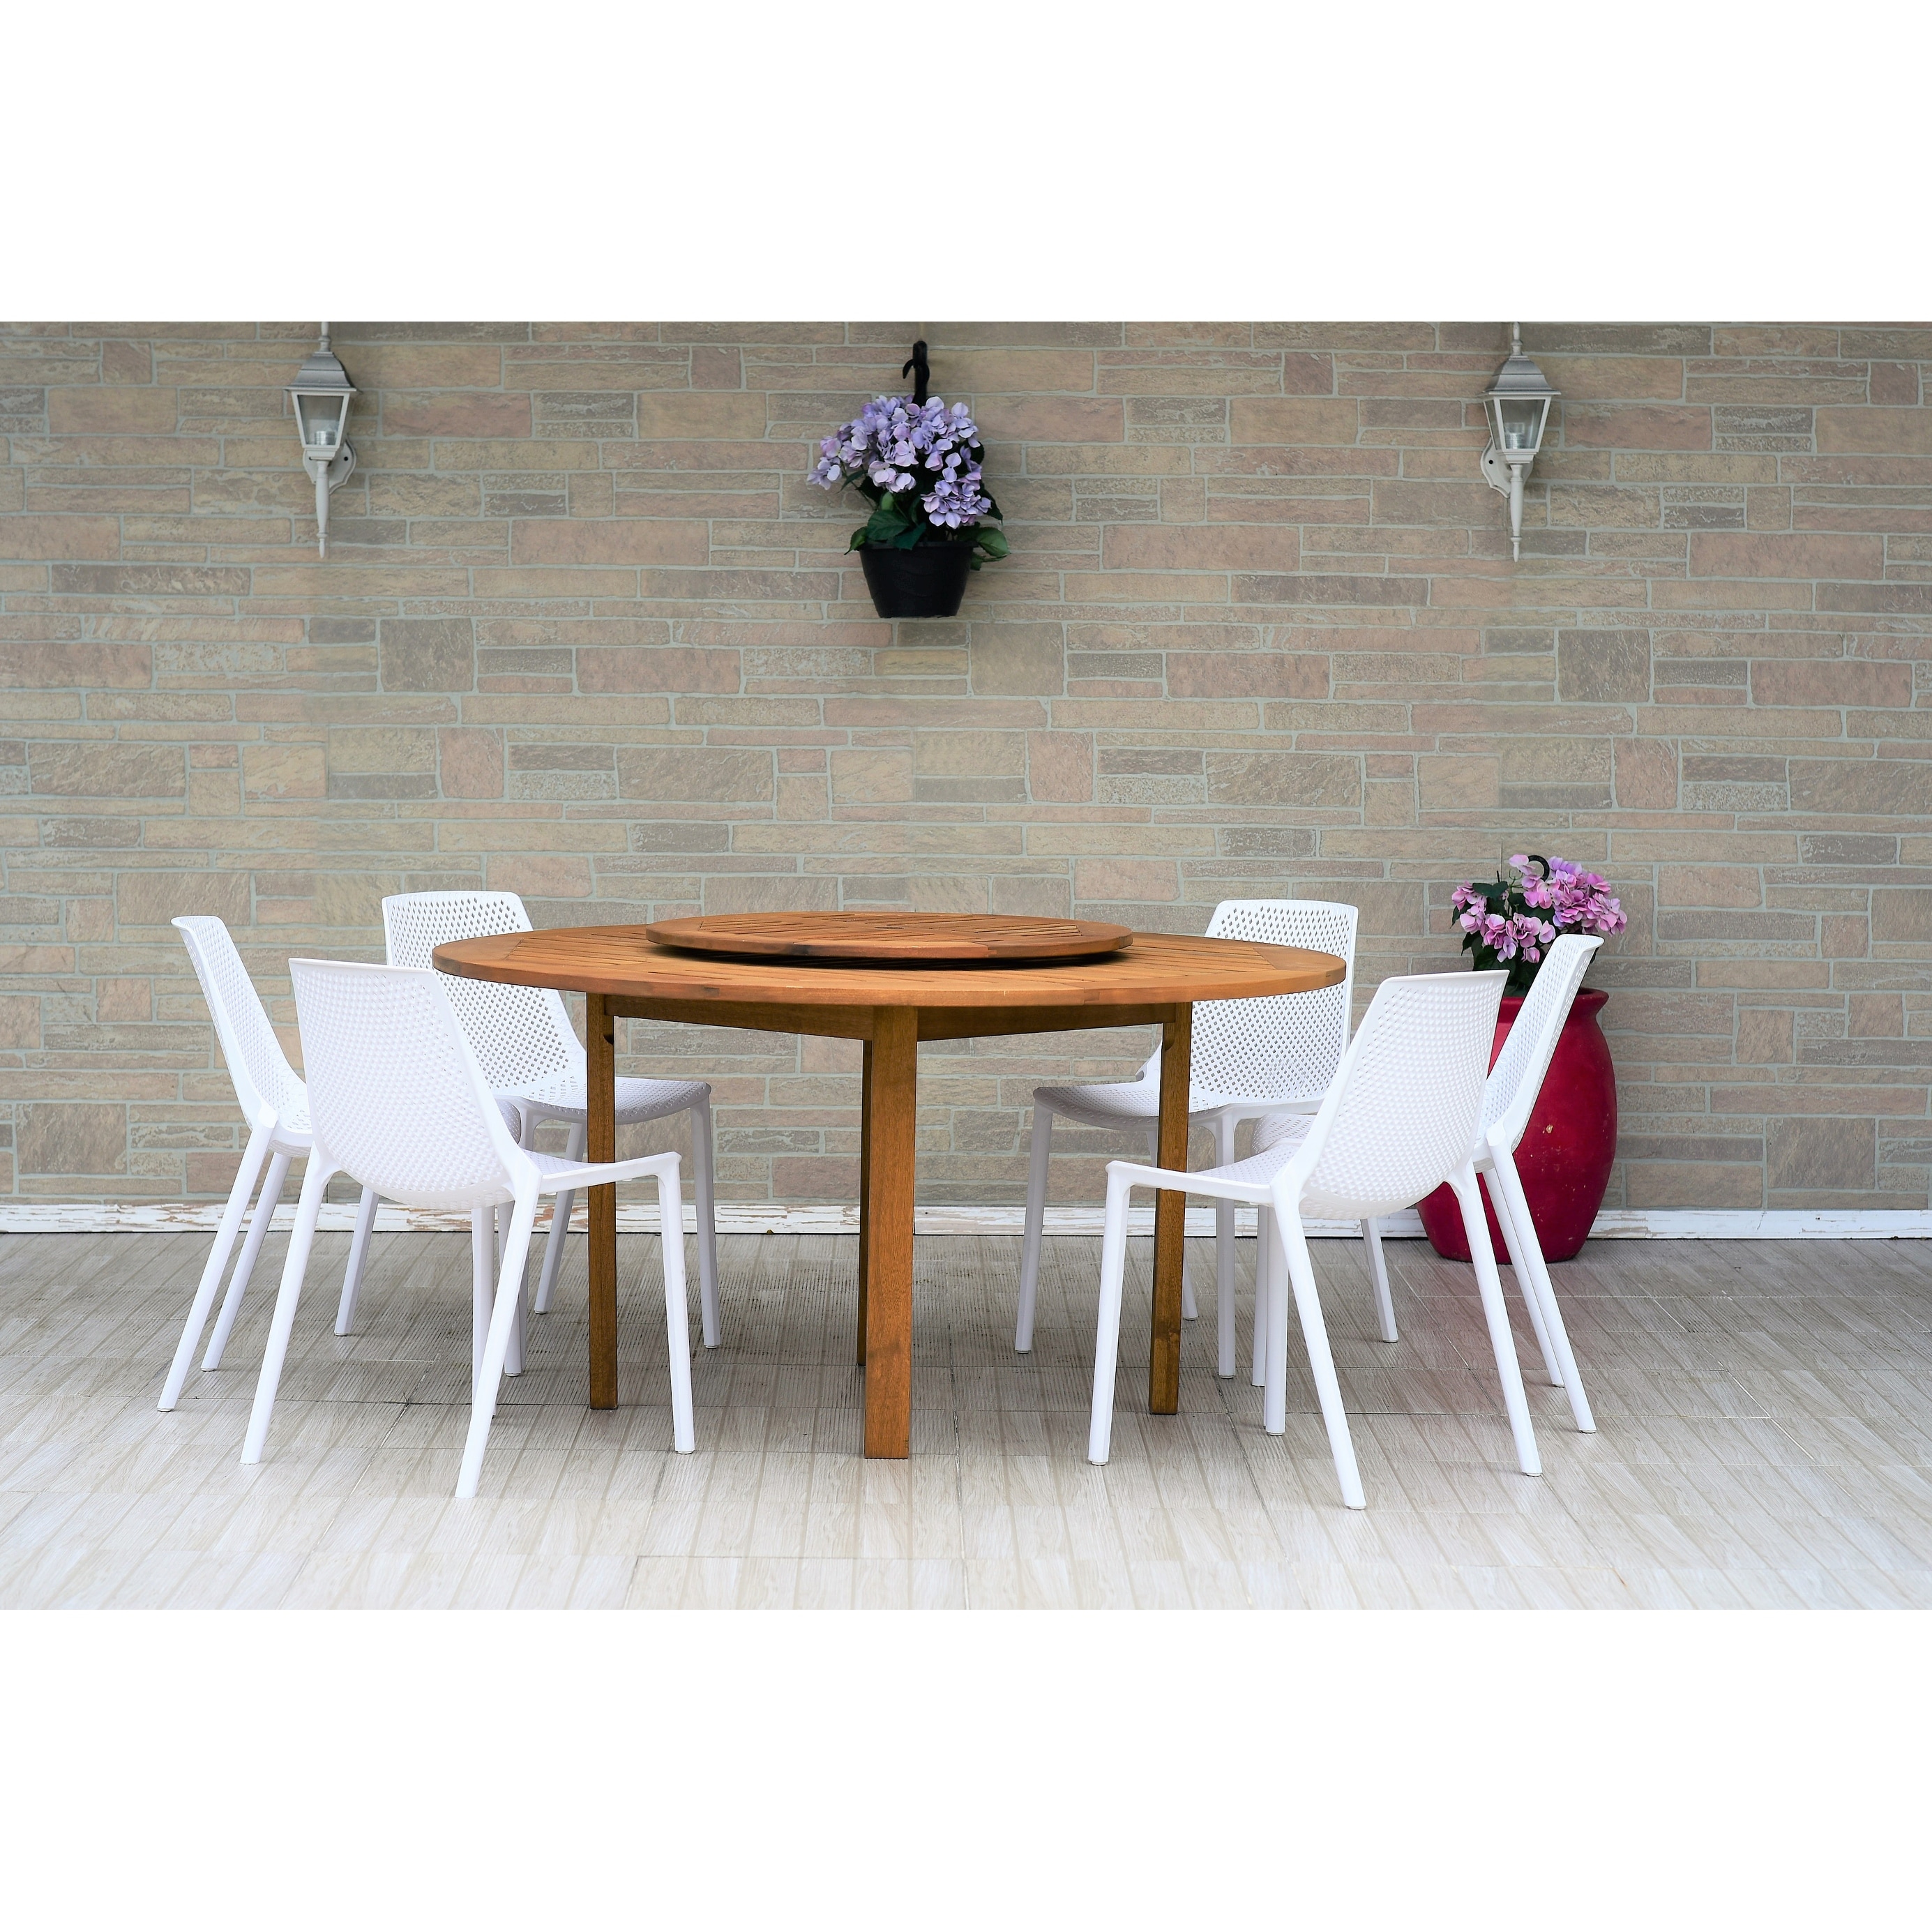 7-piece Wood Lazy Susan Dining Set With Plastic Chairs